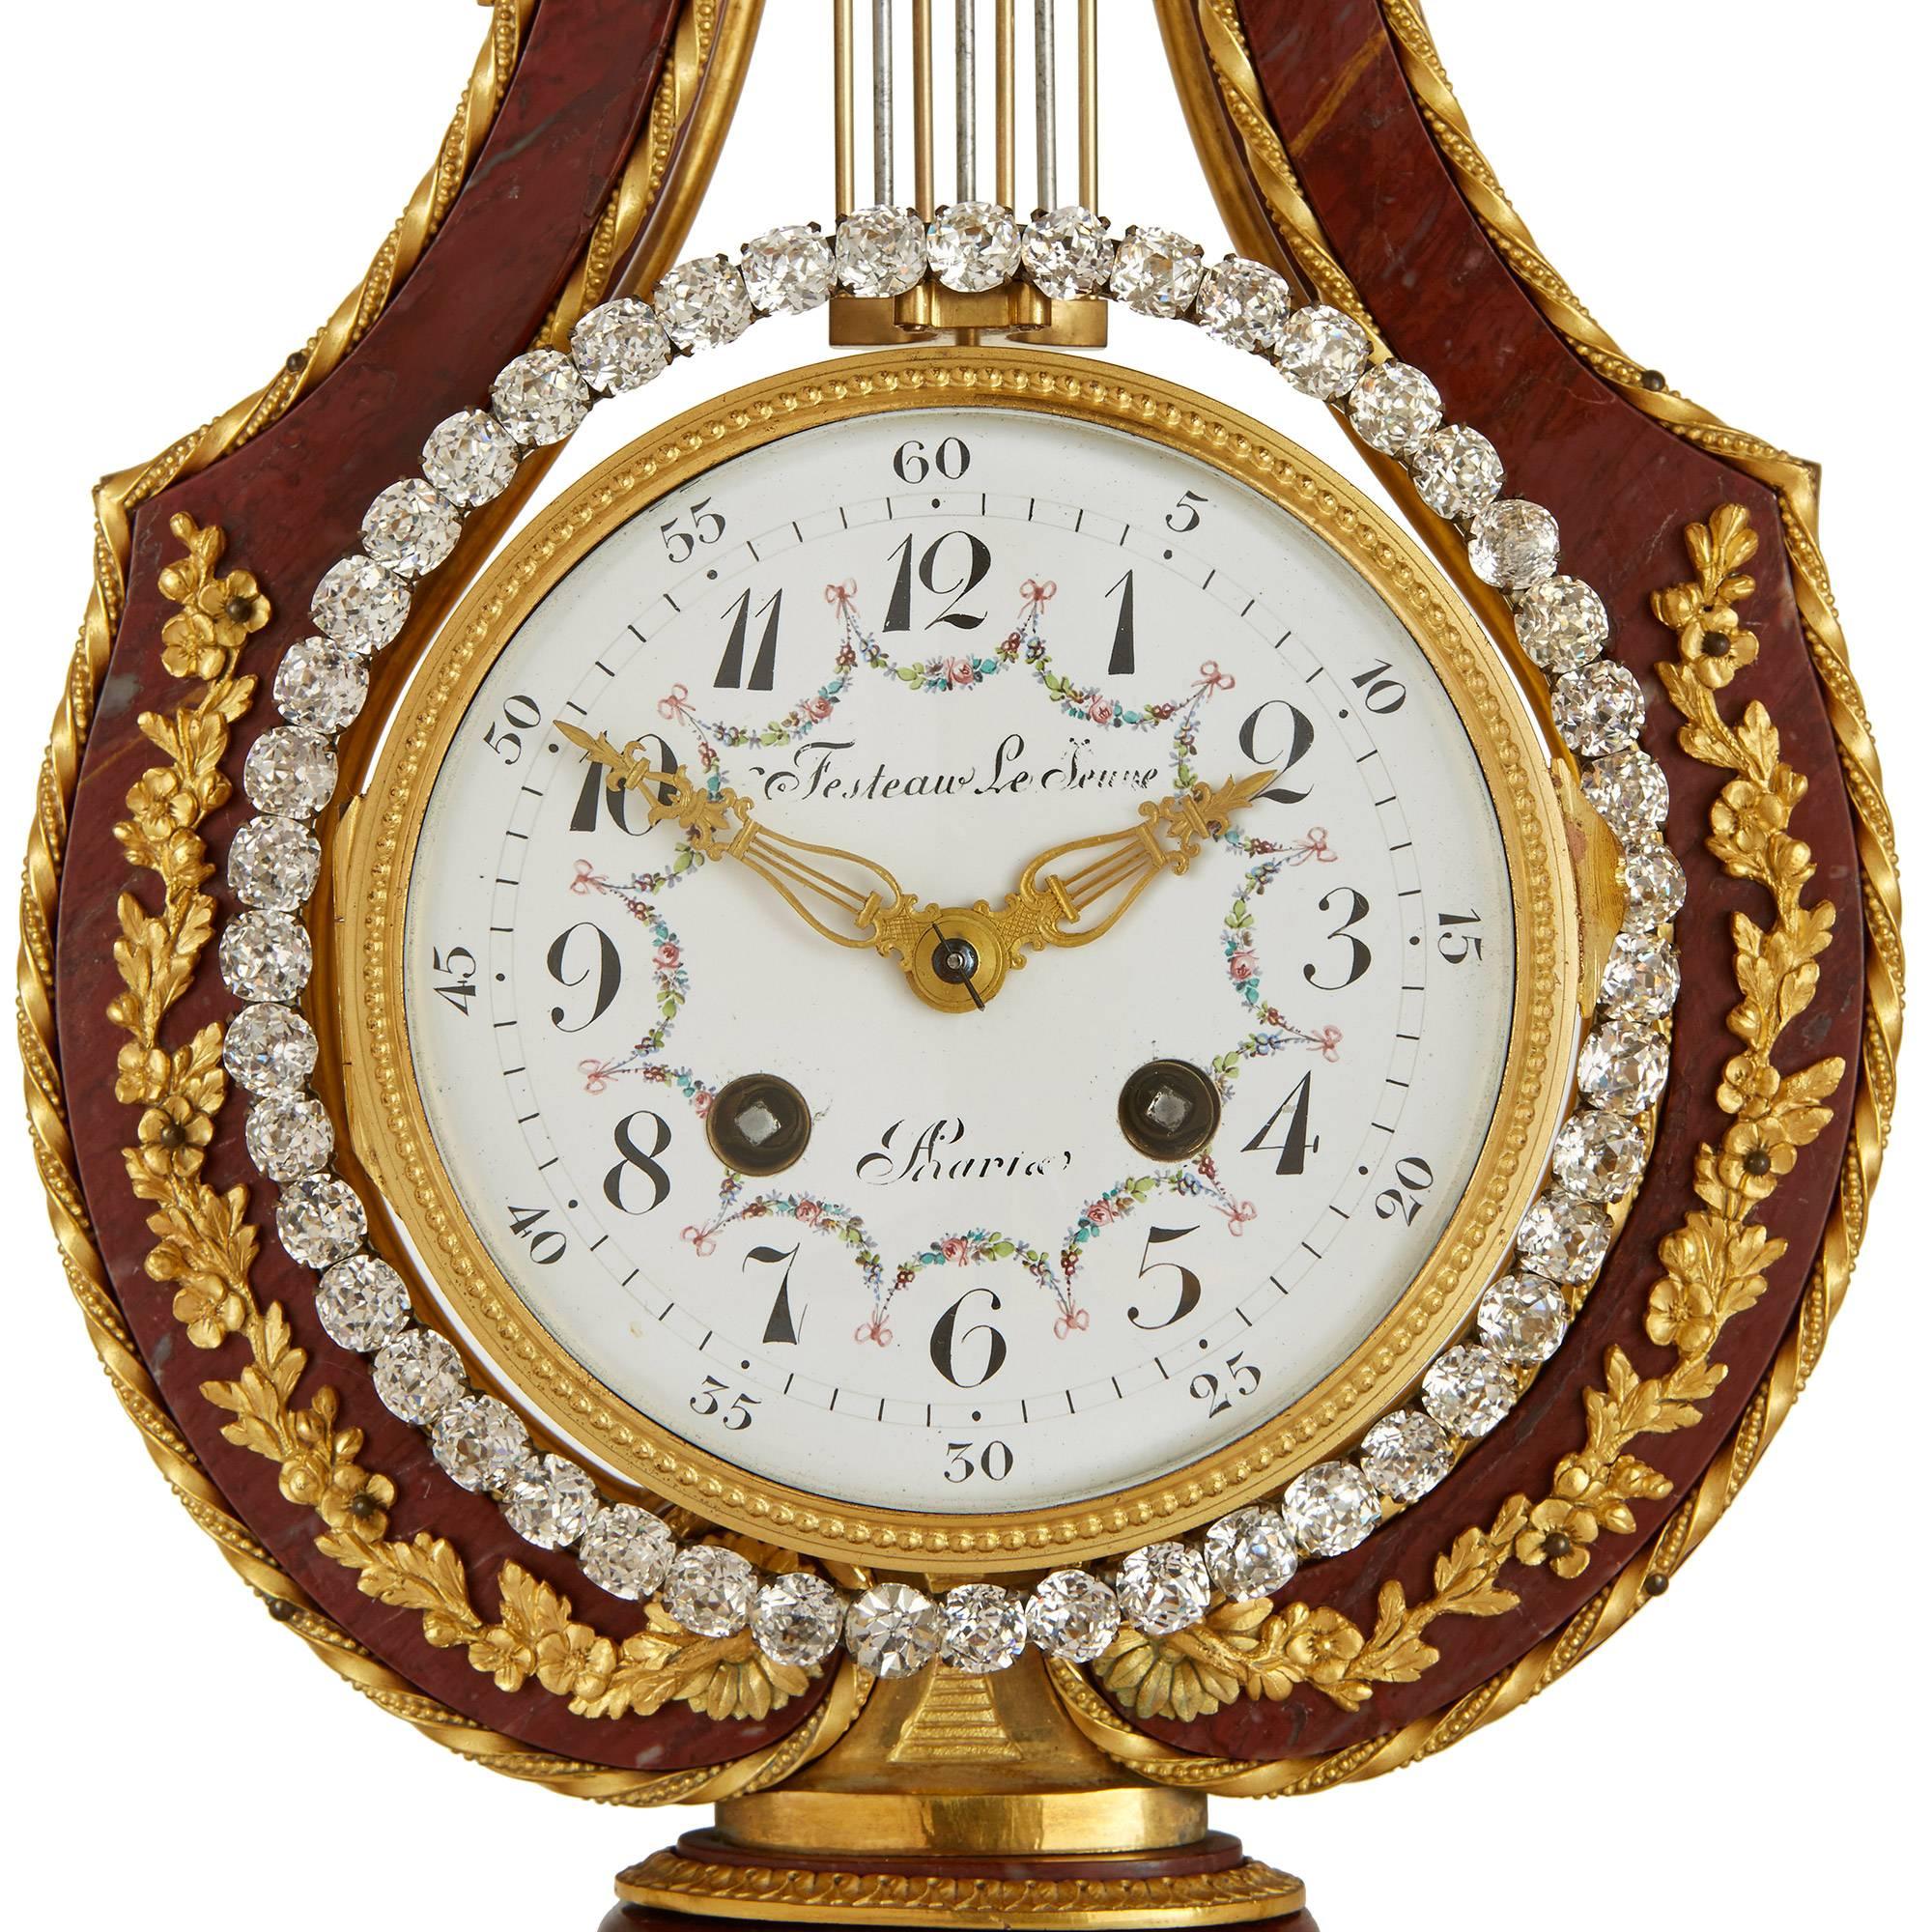 This majestic three-piece clock set is truly a sight to behold, and features beautifully contrasting rouge marble, gilt bronze and glittering jewels. The set comprises a central clock and a pair of flanking candelabra, which all feature